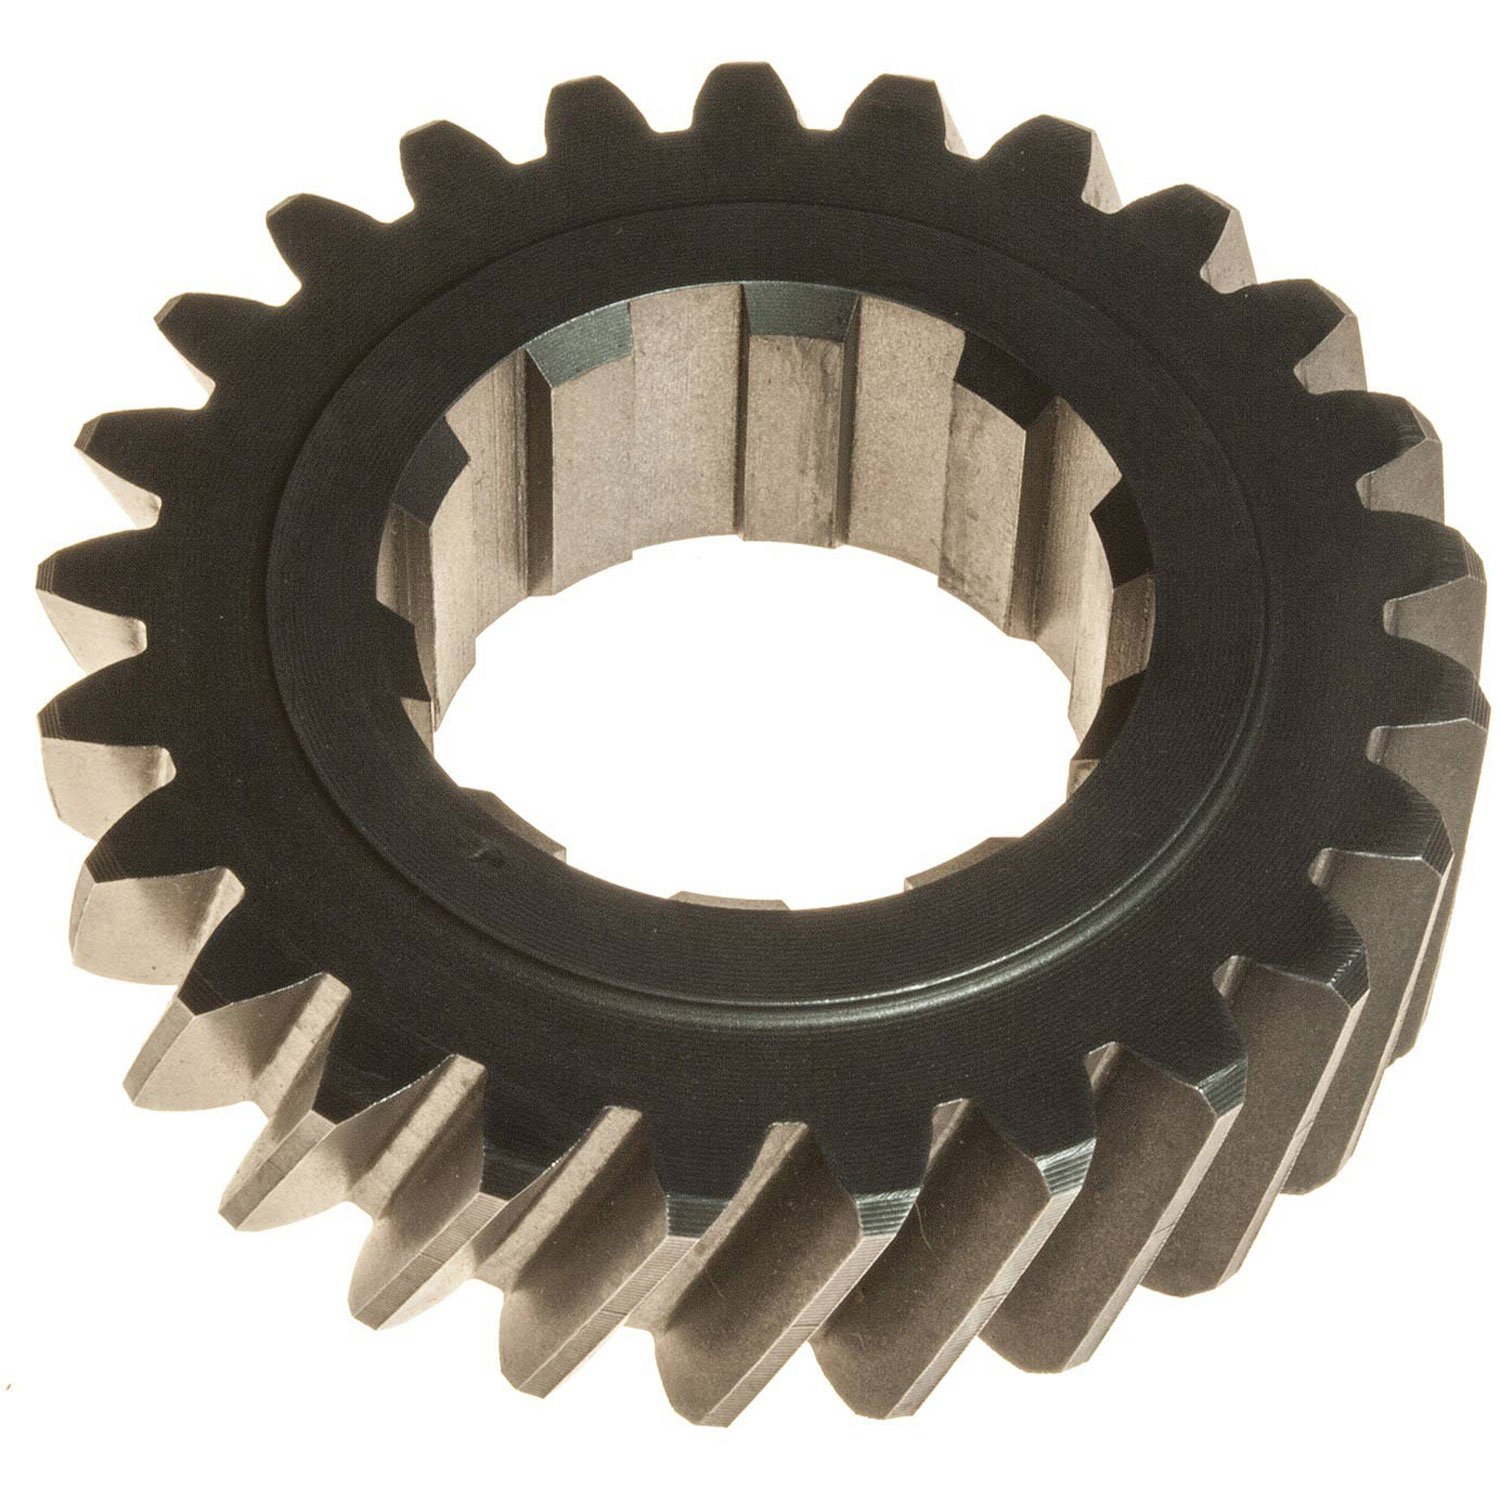 2nd & 3rd Gear Clustershaft 33/25 Tooth Count